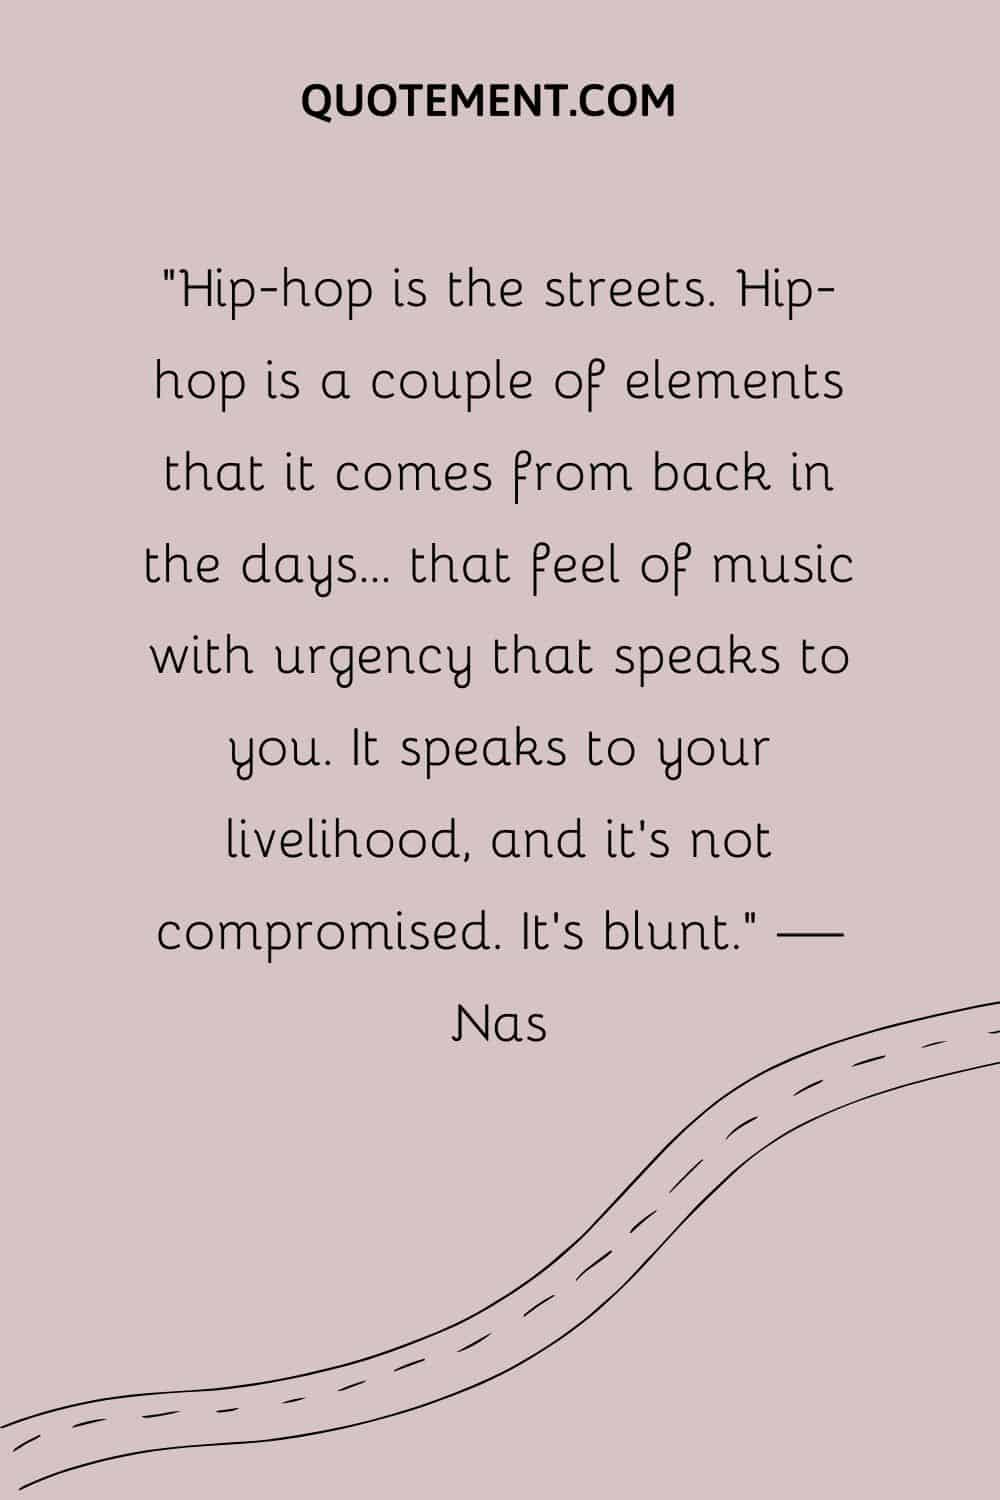 Hip-hop is the streets